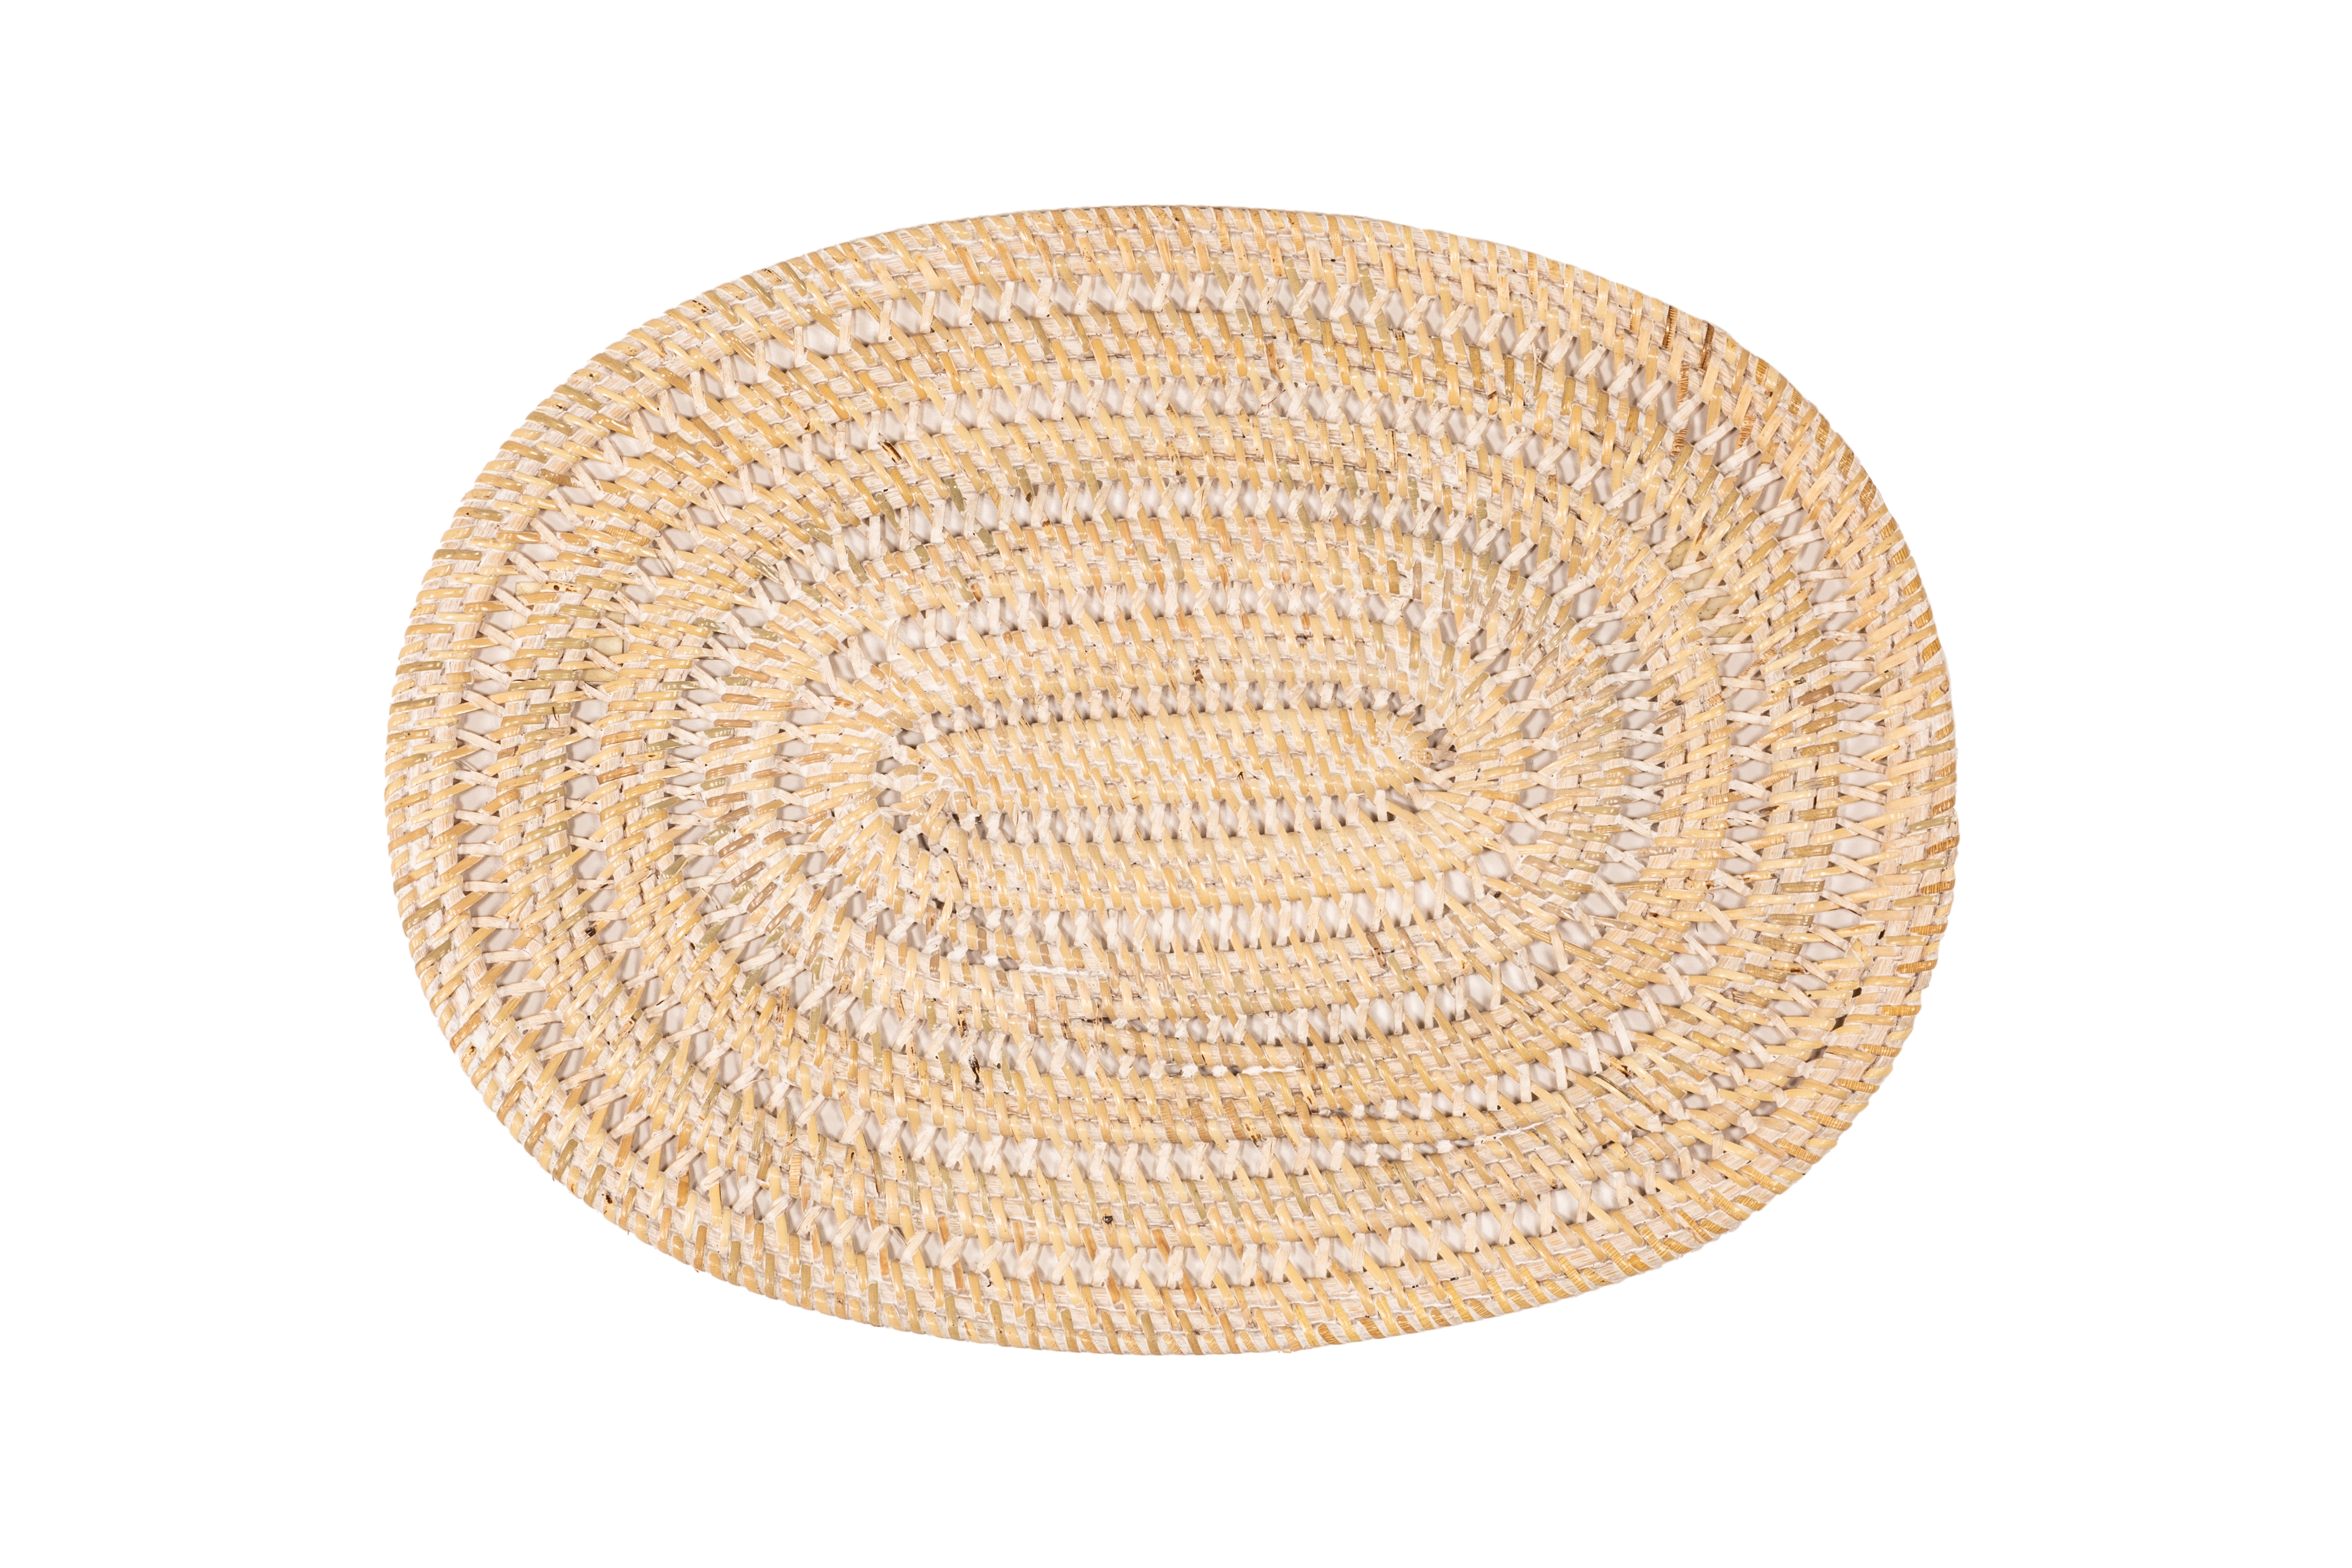 Placemat rattan 30x40 cm - oval, SPIRAL, white